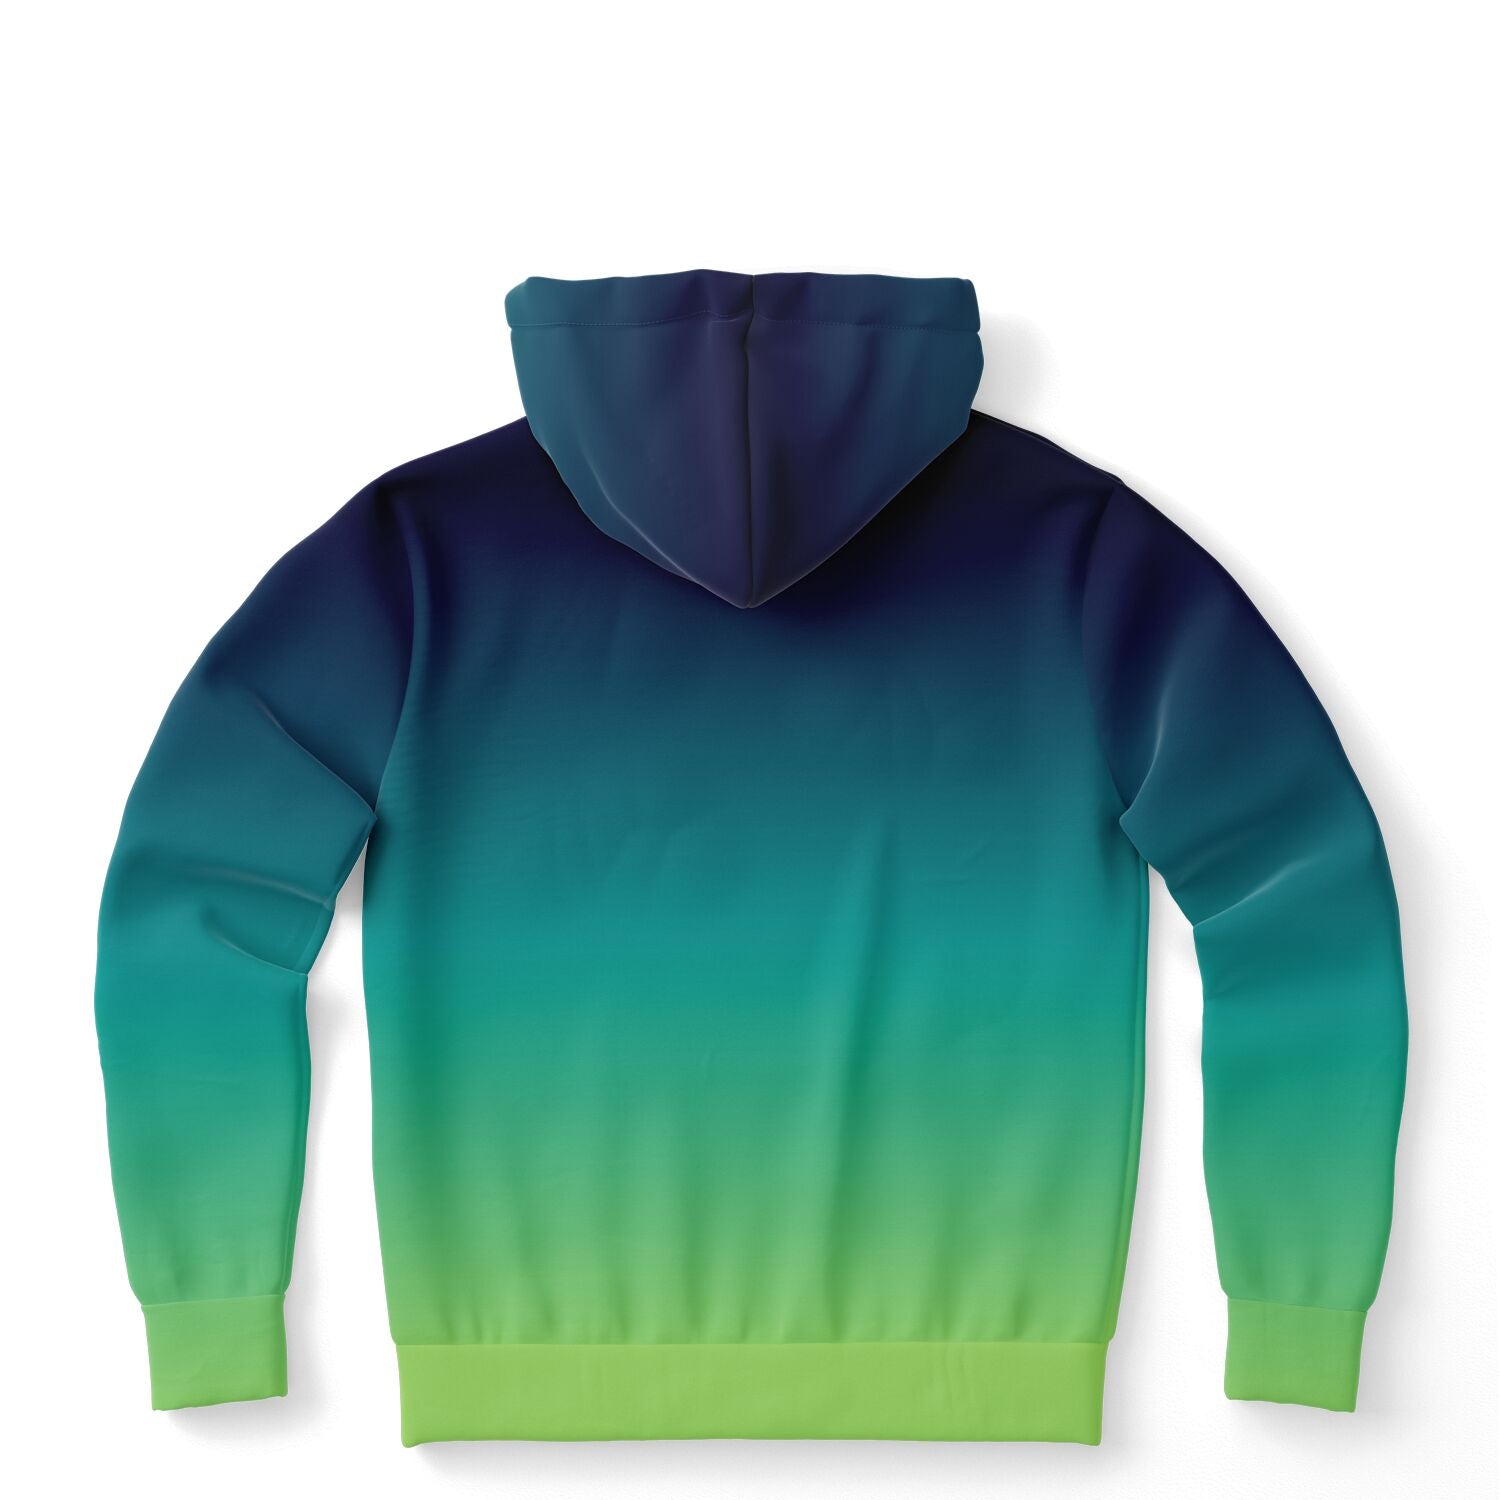 Blue and Green Ombre Hoodie, Tie Dye Gradient Pullover Men Women Adult Aesthetic Graphic Hooded Sweatshirt with Pockets Starcove Fashion